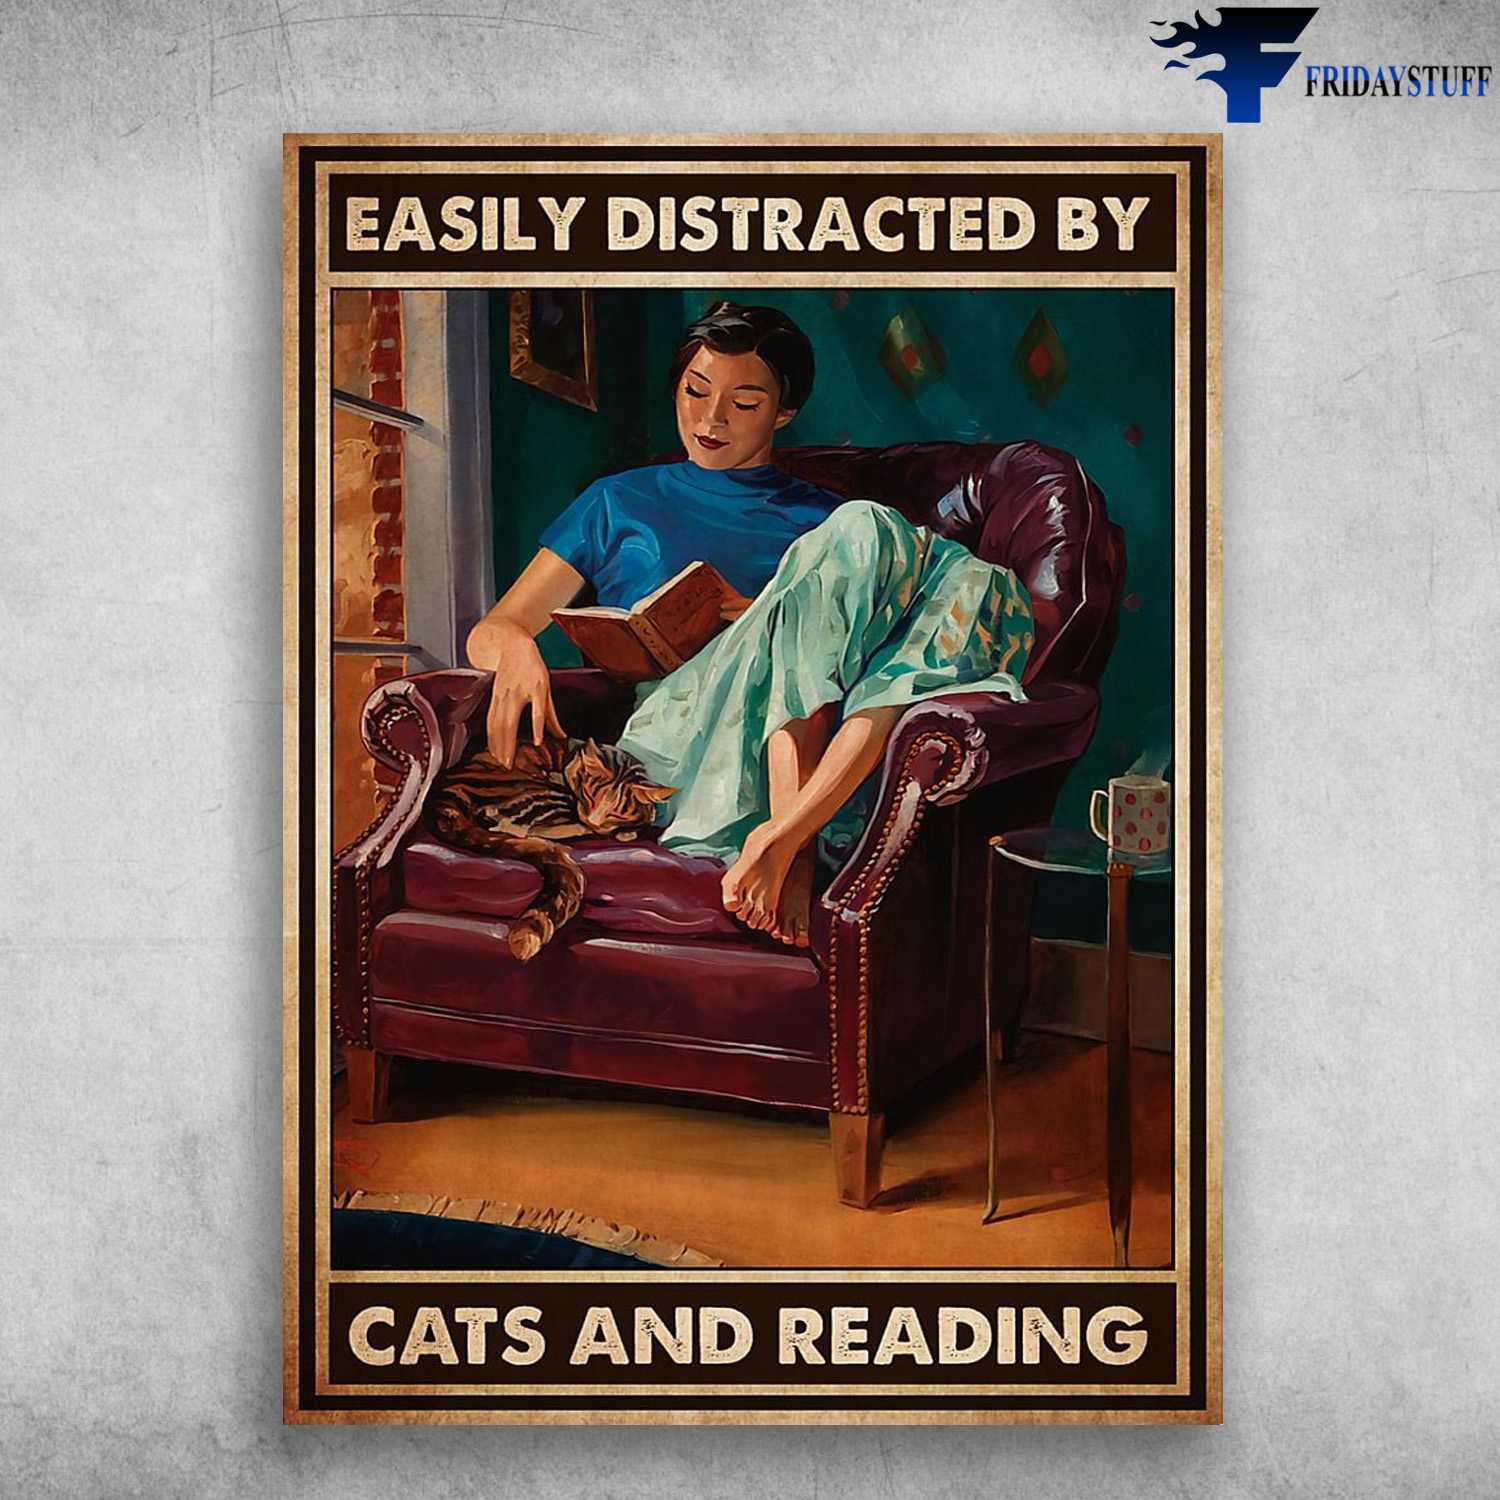 Cat Lover, Book Reading, Easily Distracted By, Cats And Reading